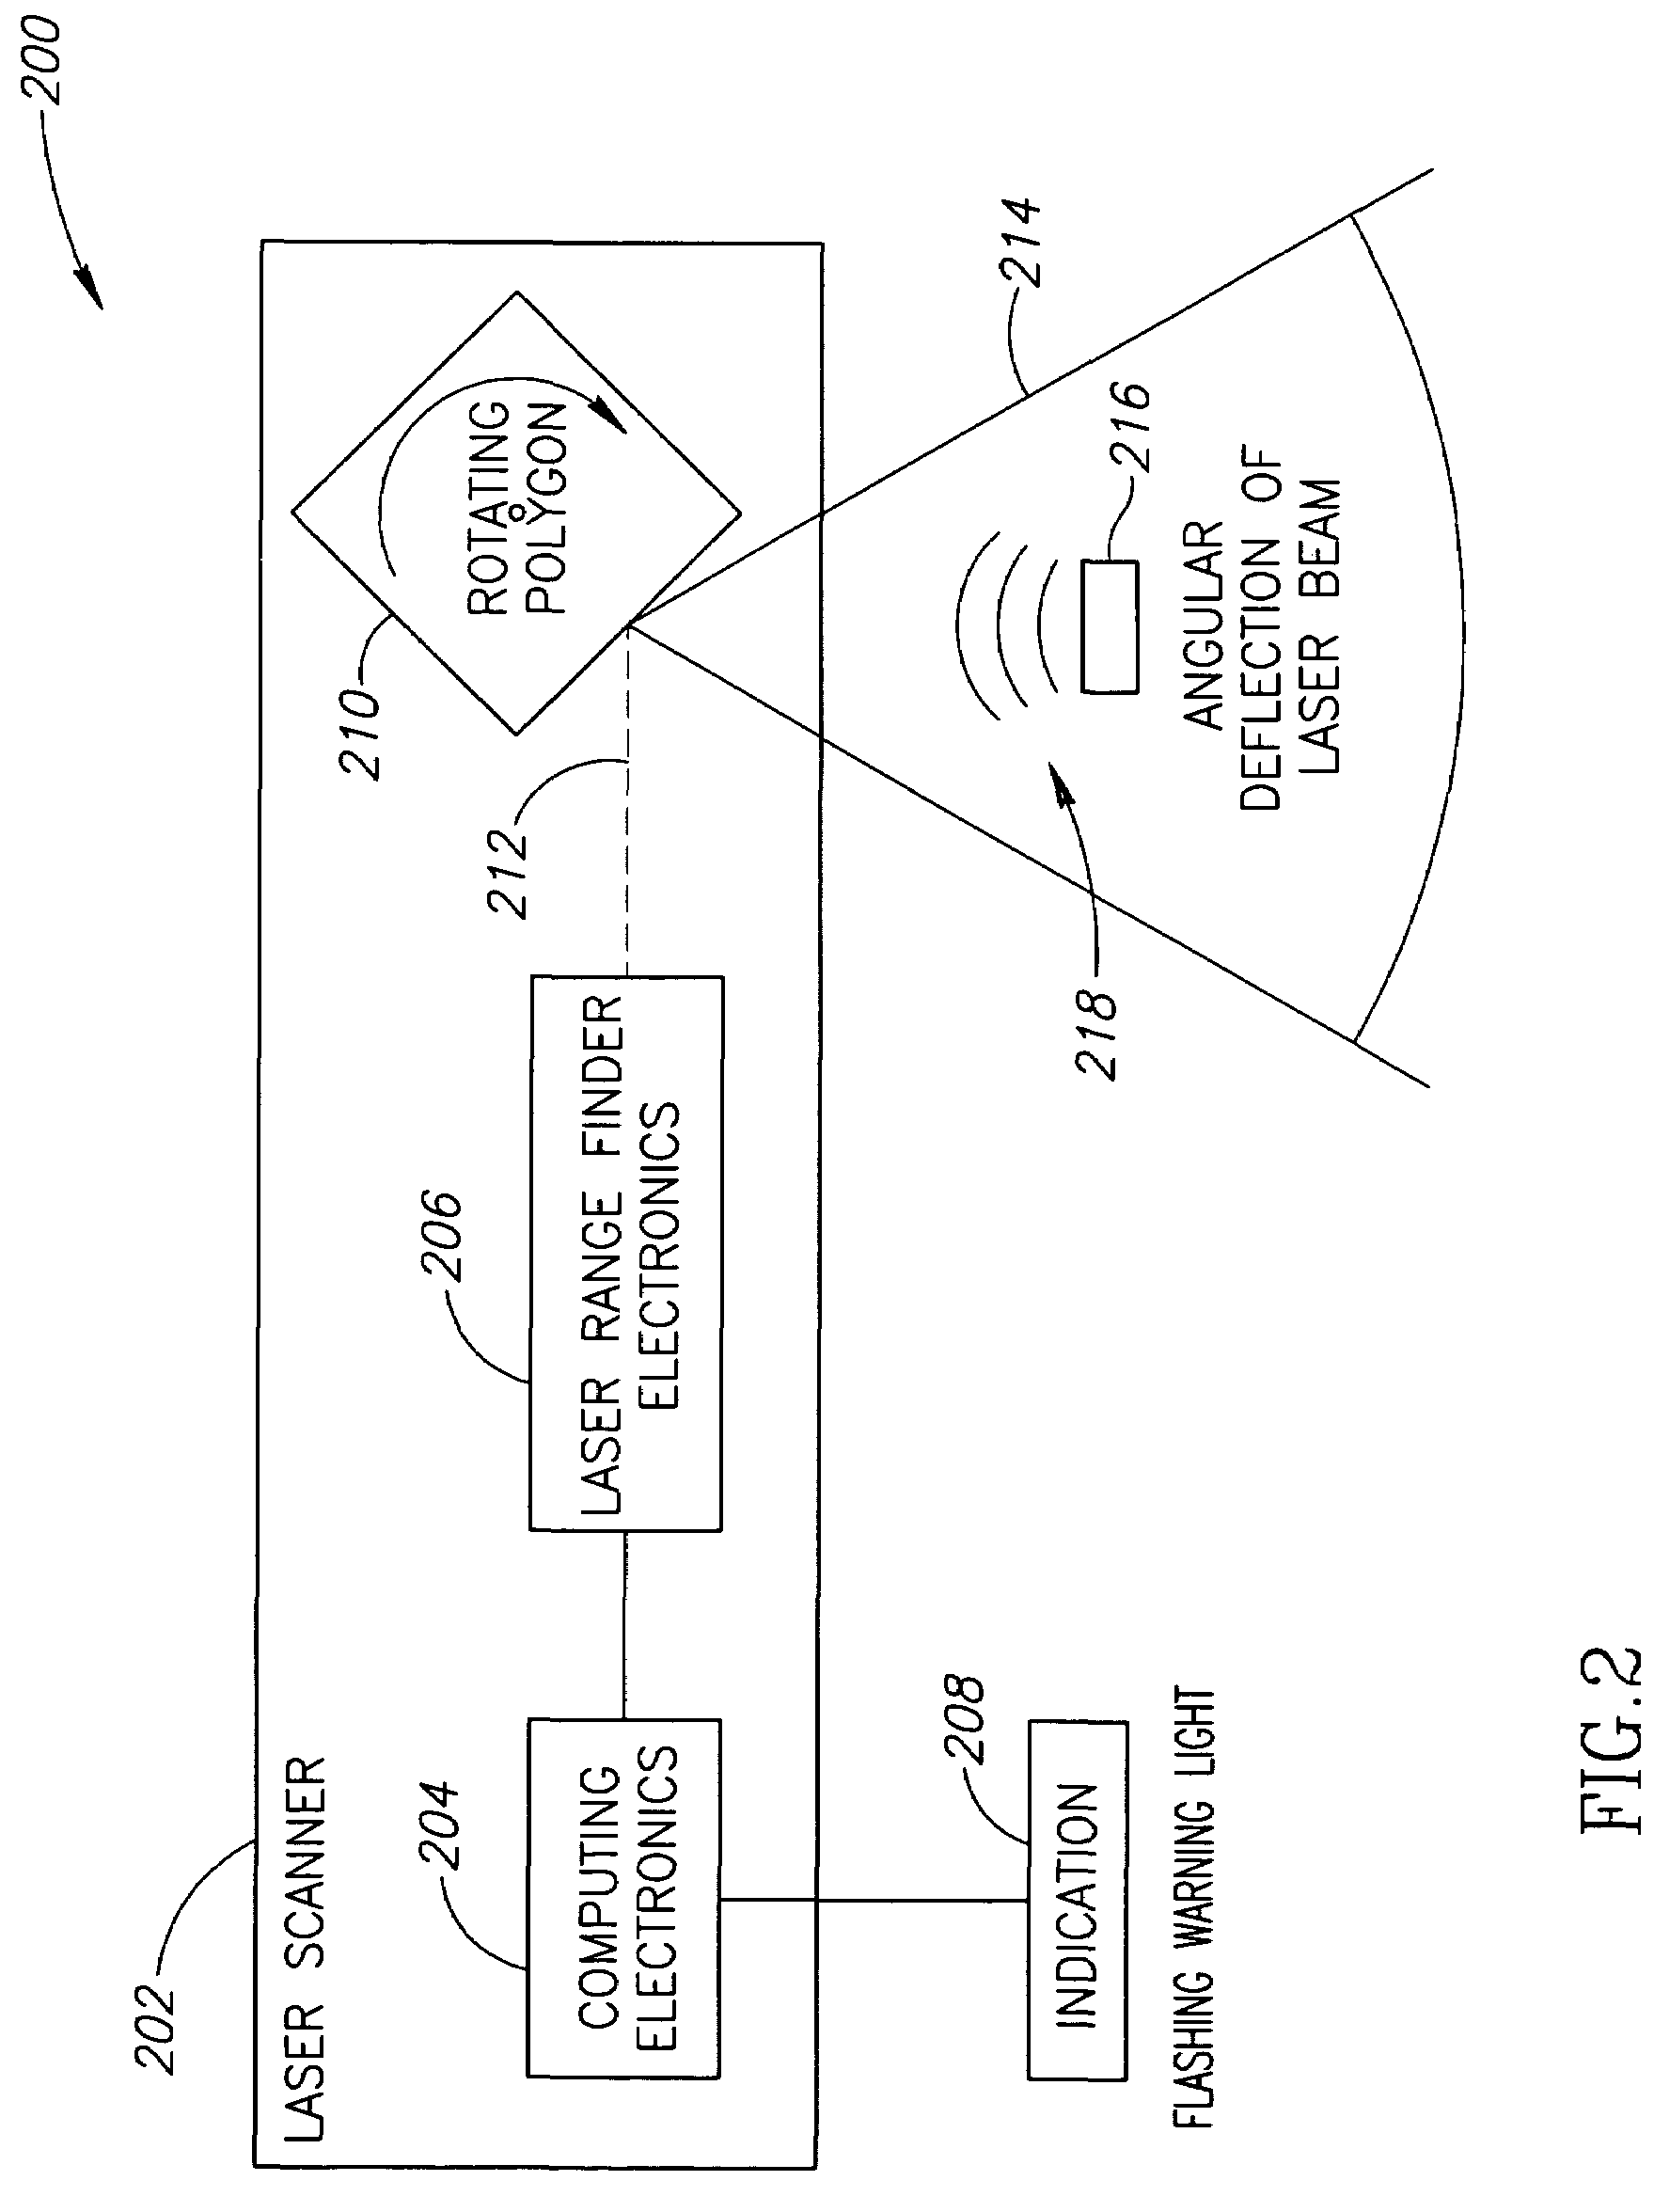 Systems and methods for collision avoidance